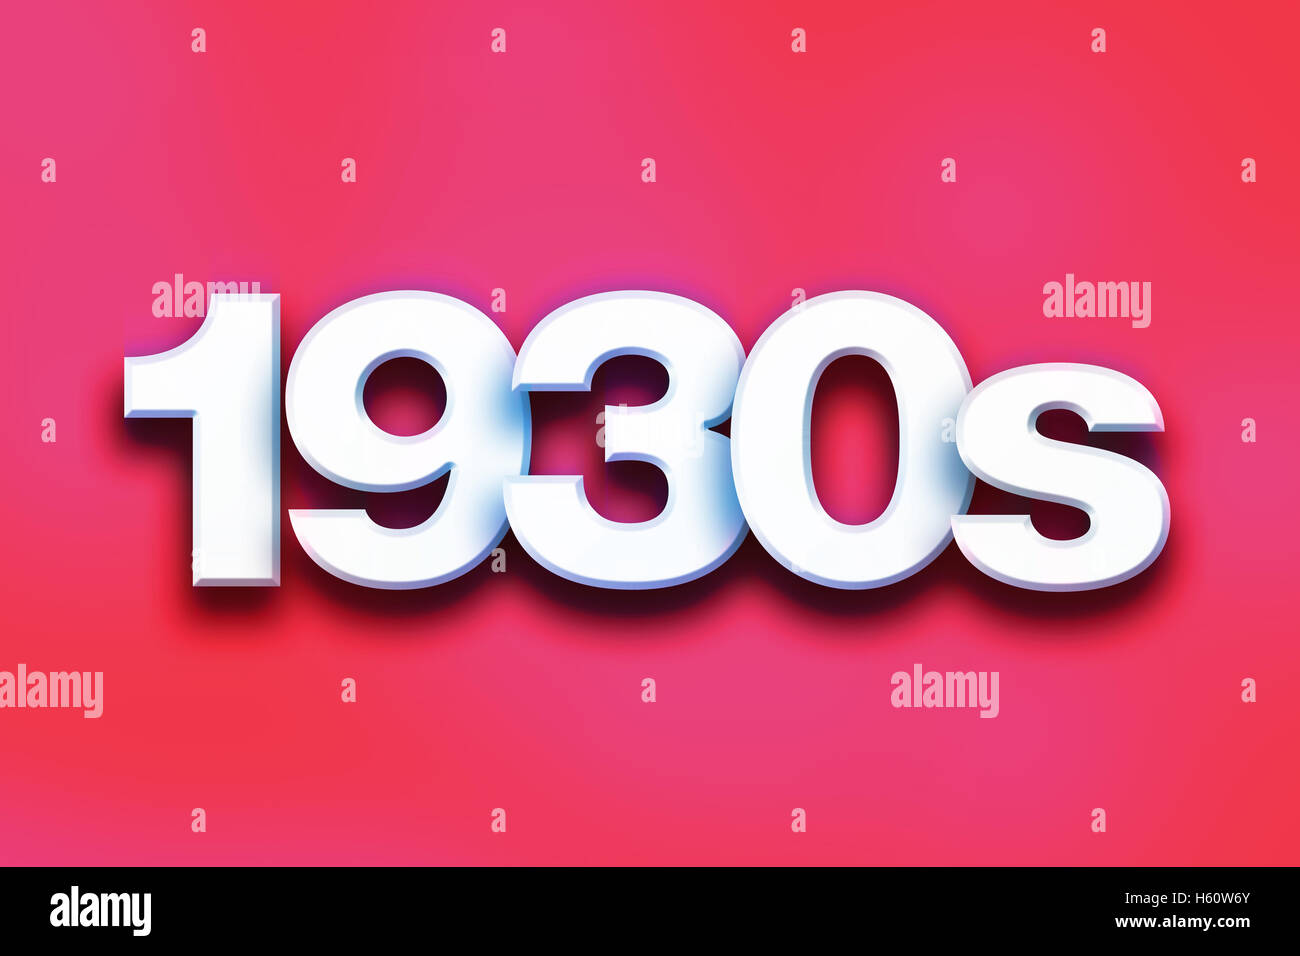 The word '1930s' written in white 3D letters on a colorful background concept and theme. Stock Photo